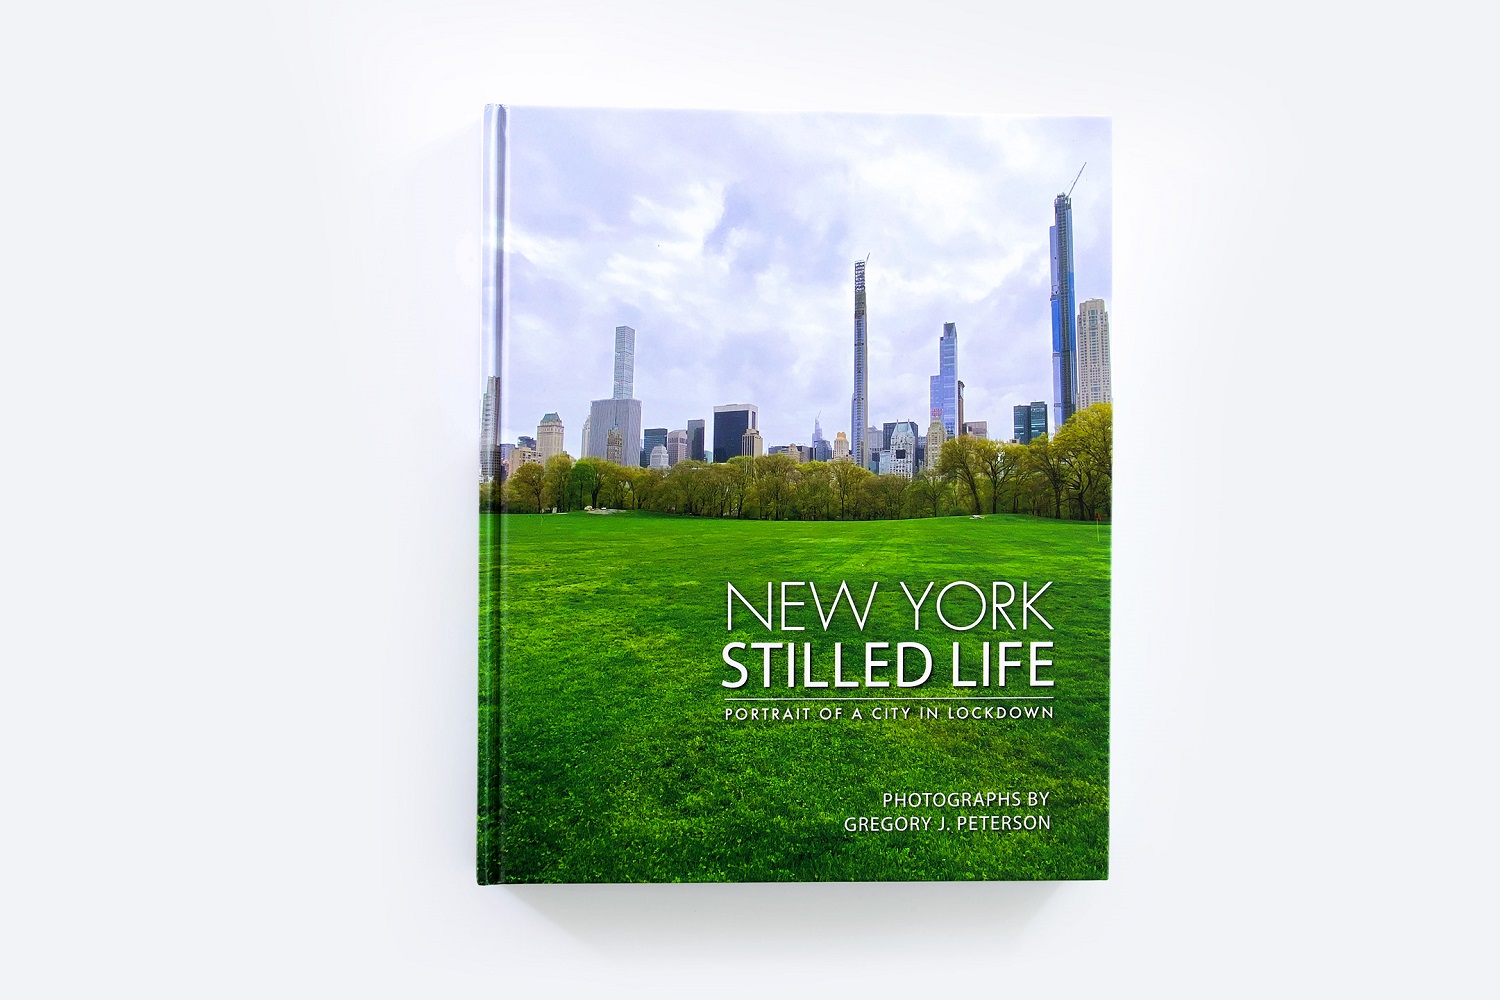 Book cover for New York Stilled Life. Photograph taken of an empty field in New York's Central Park